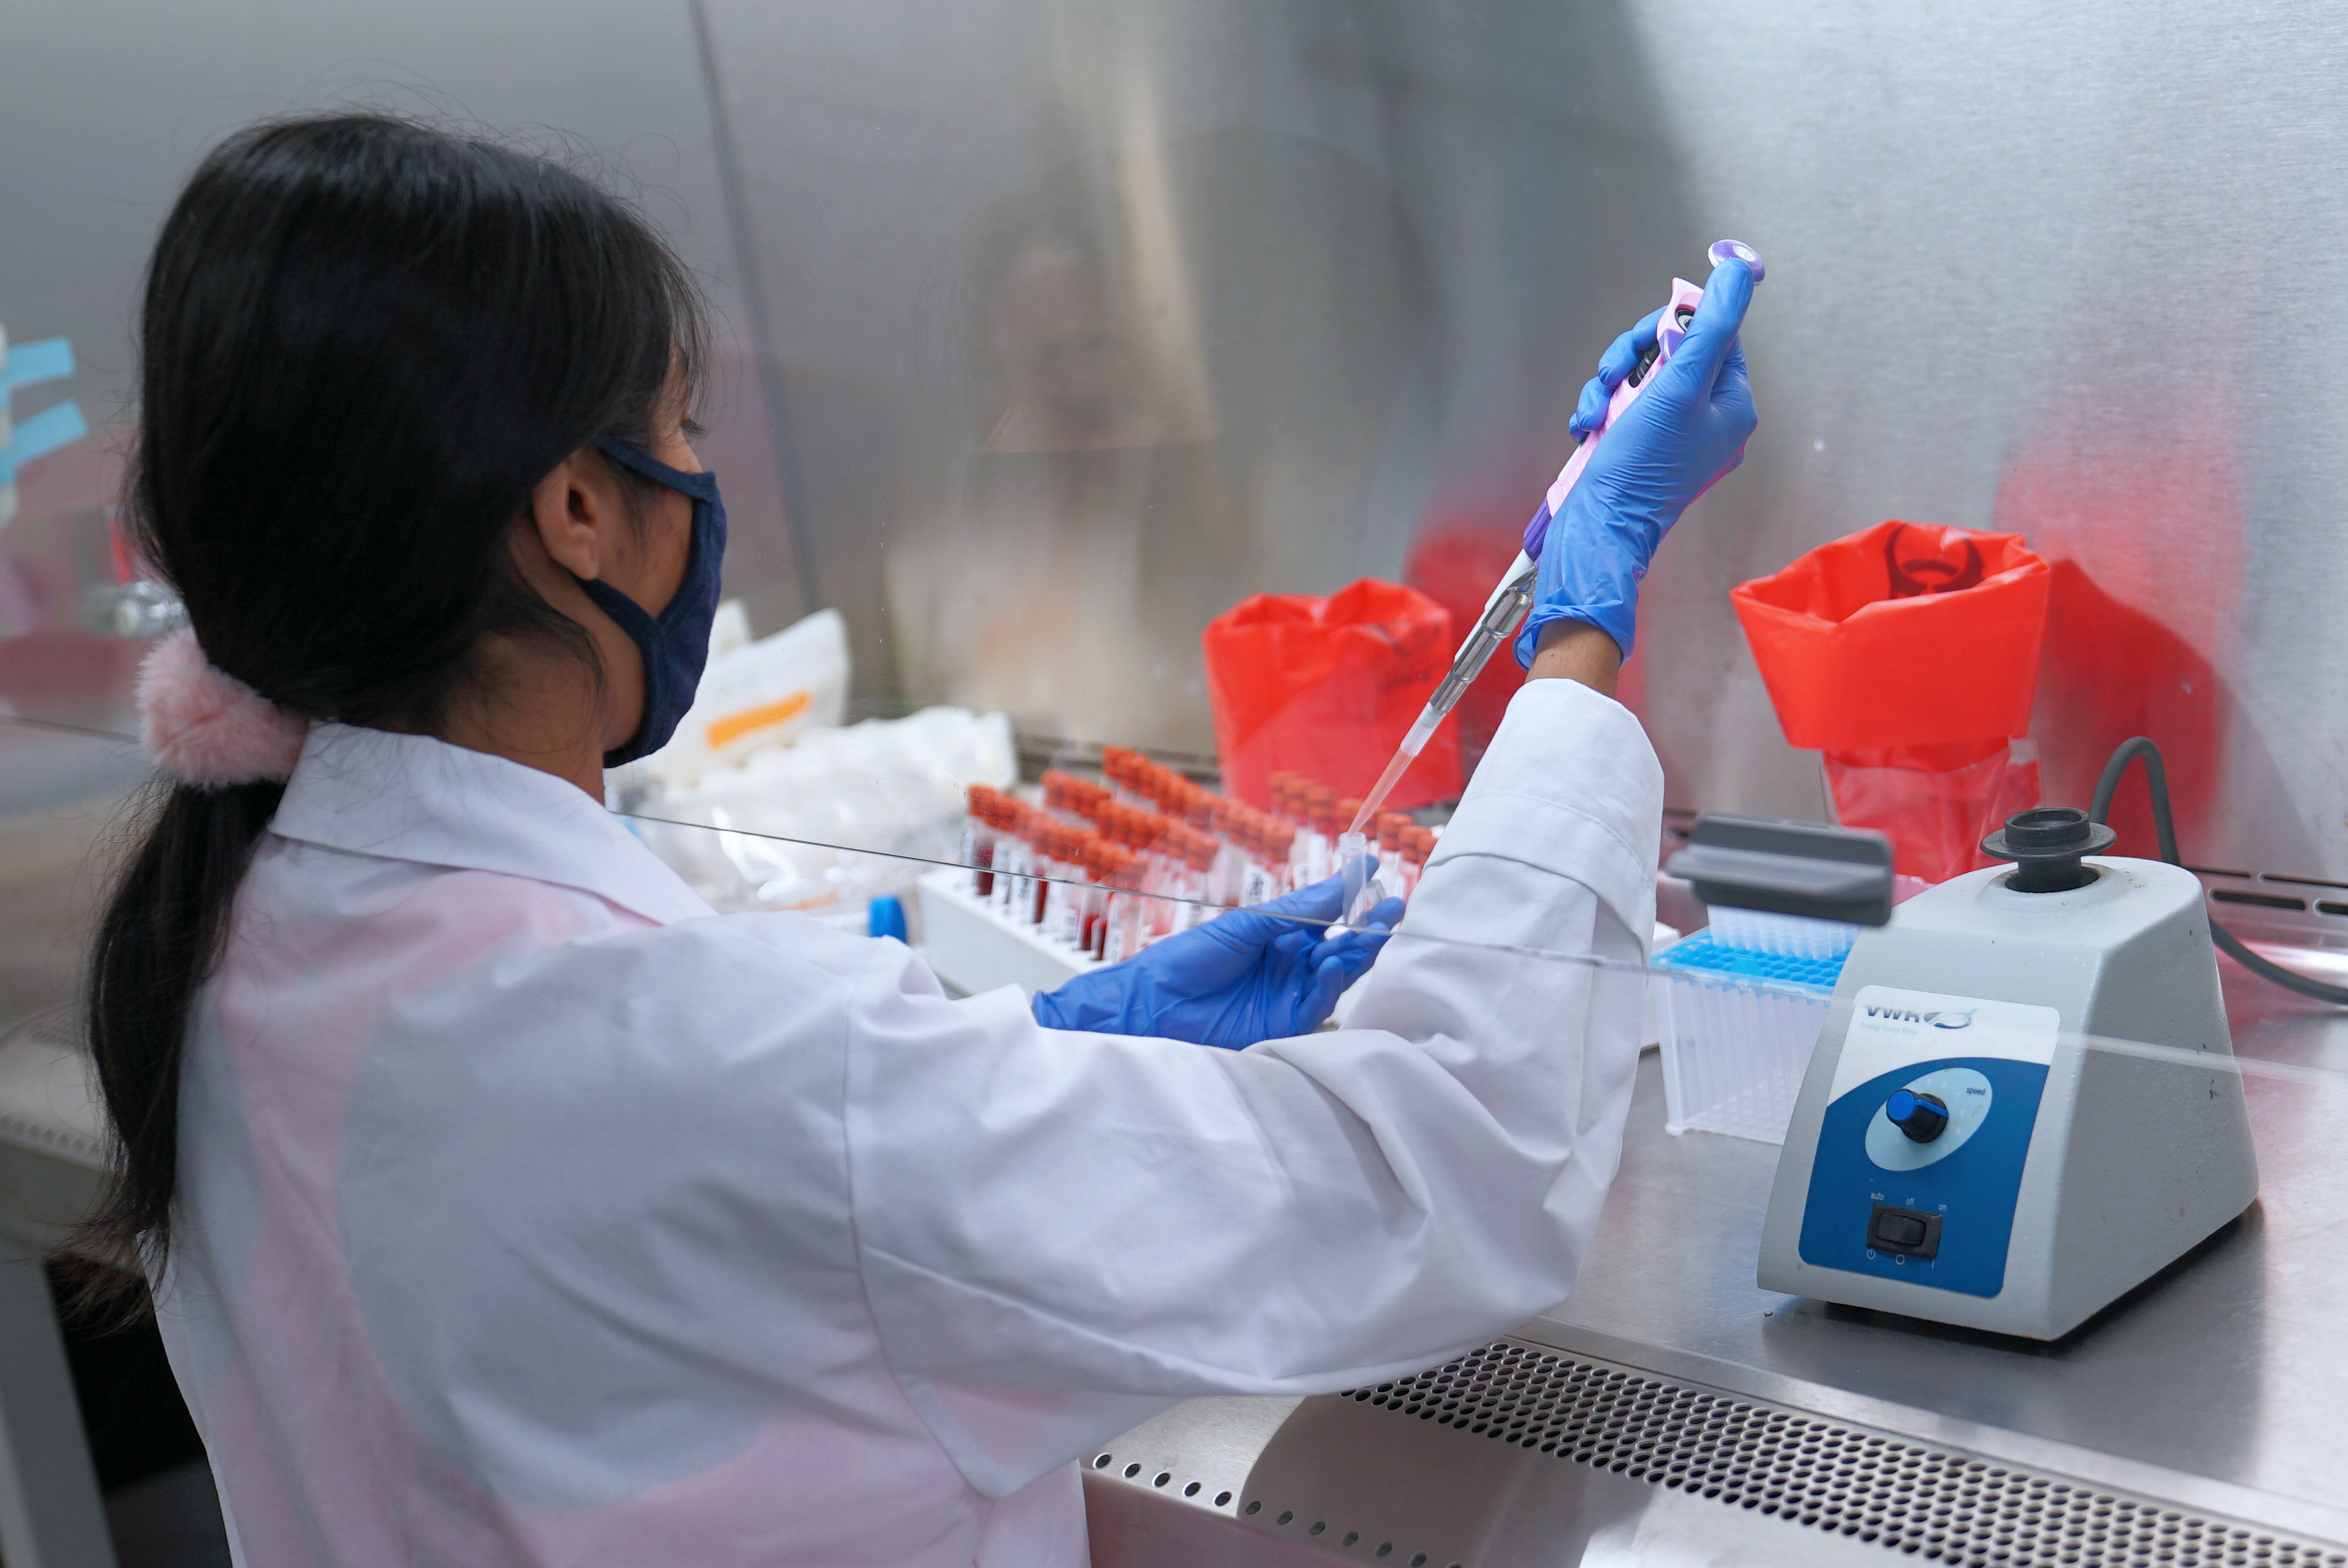 Research assistant preparing blood samples in a lab.